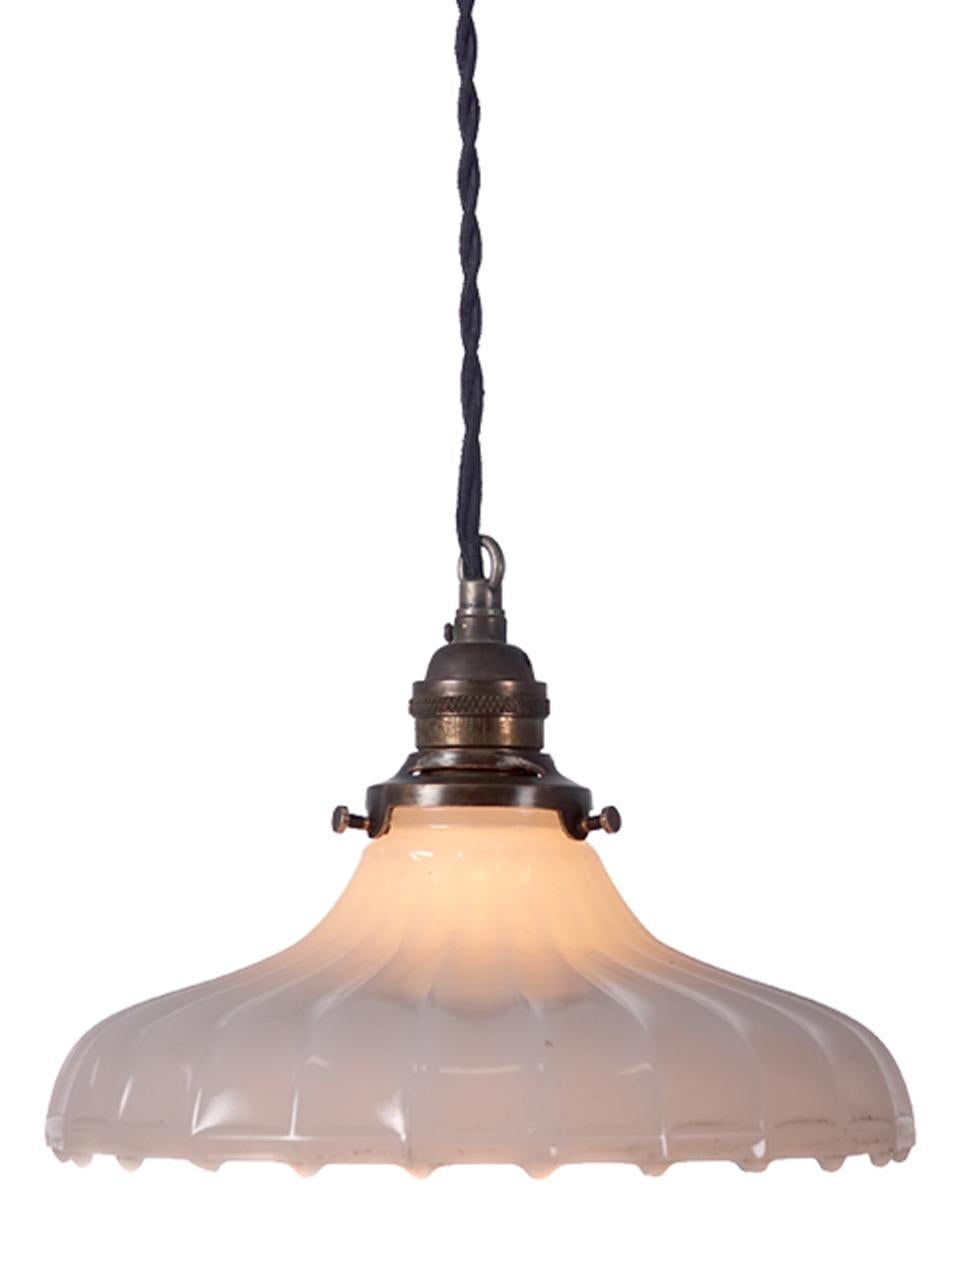 These softly curved pendants are a Classic. They feel at home with any style decor. This example is an extra heavy pattern with a clam broth glass. The lamps are priced per so you can buy just one or the collection.